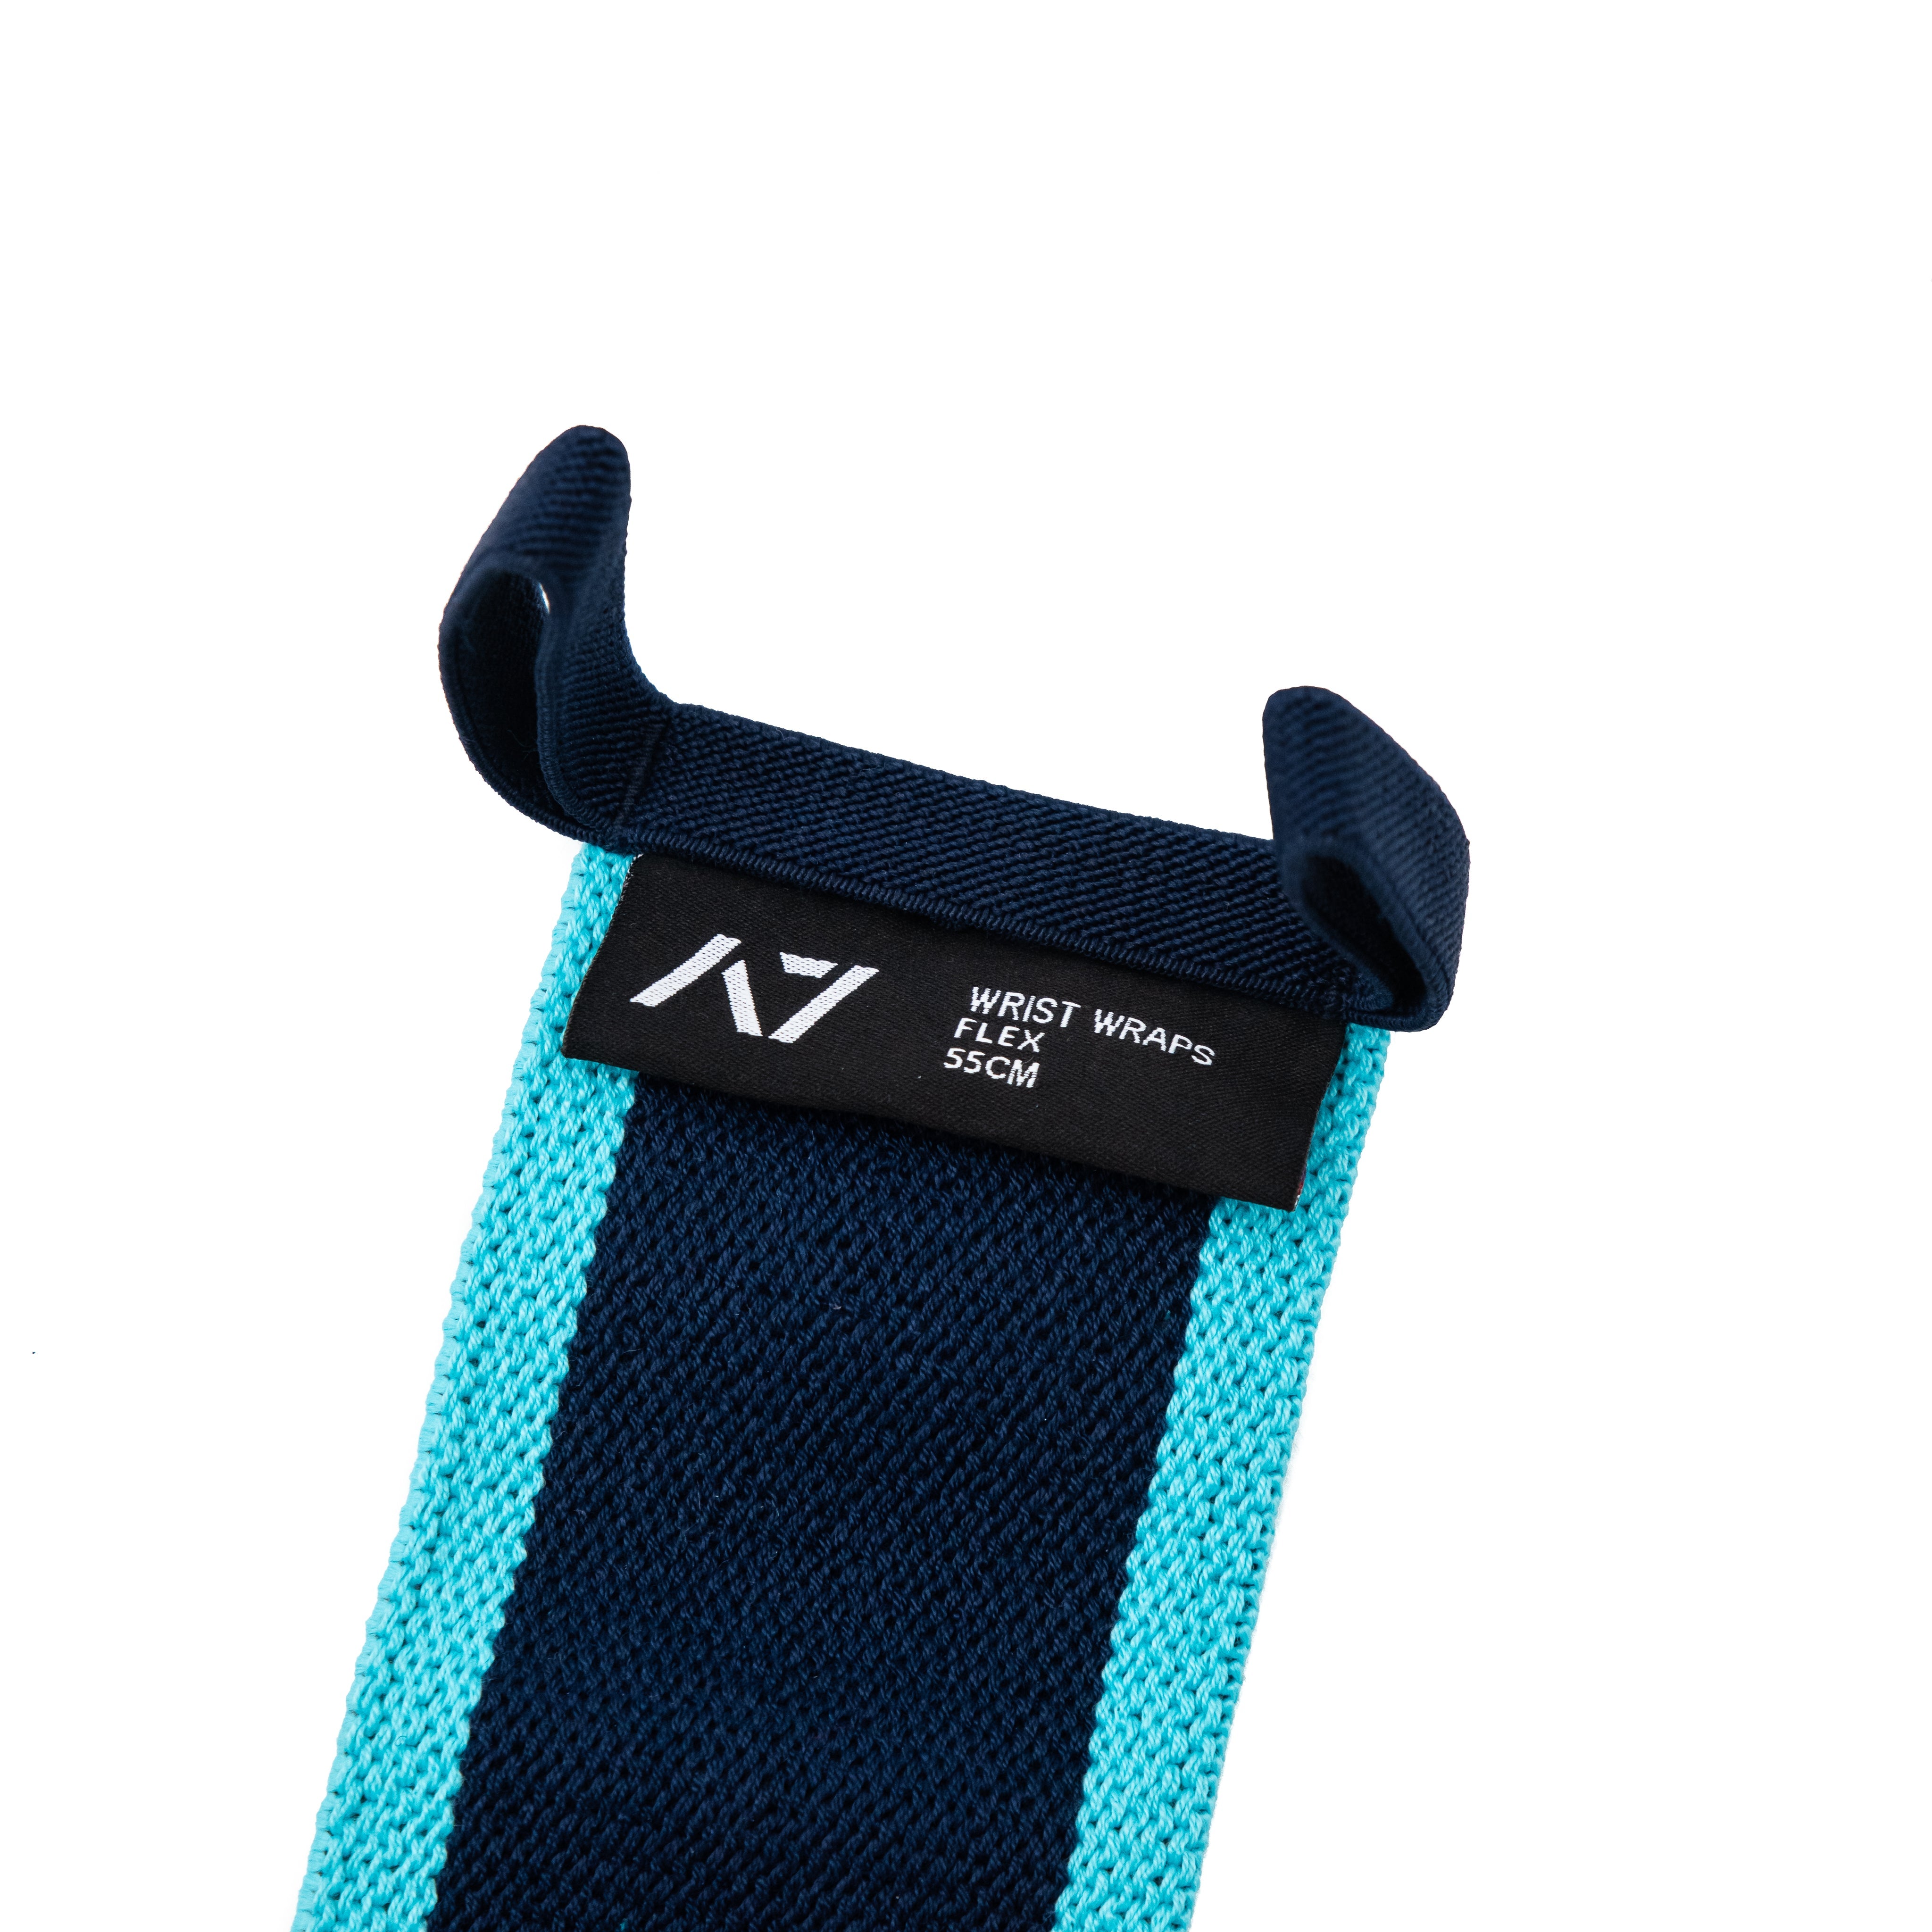 This Iced colourway is a reflection of the sea and a way to cool off from the summer heat. A colourway that stands out on the platform, while still providing the level of quality, support and comfort you demand from your products. These wrist wraps are a perfect addition to your IPF approved kit.